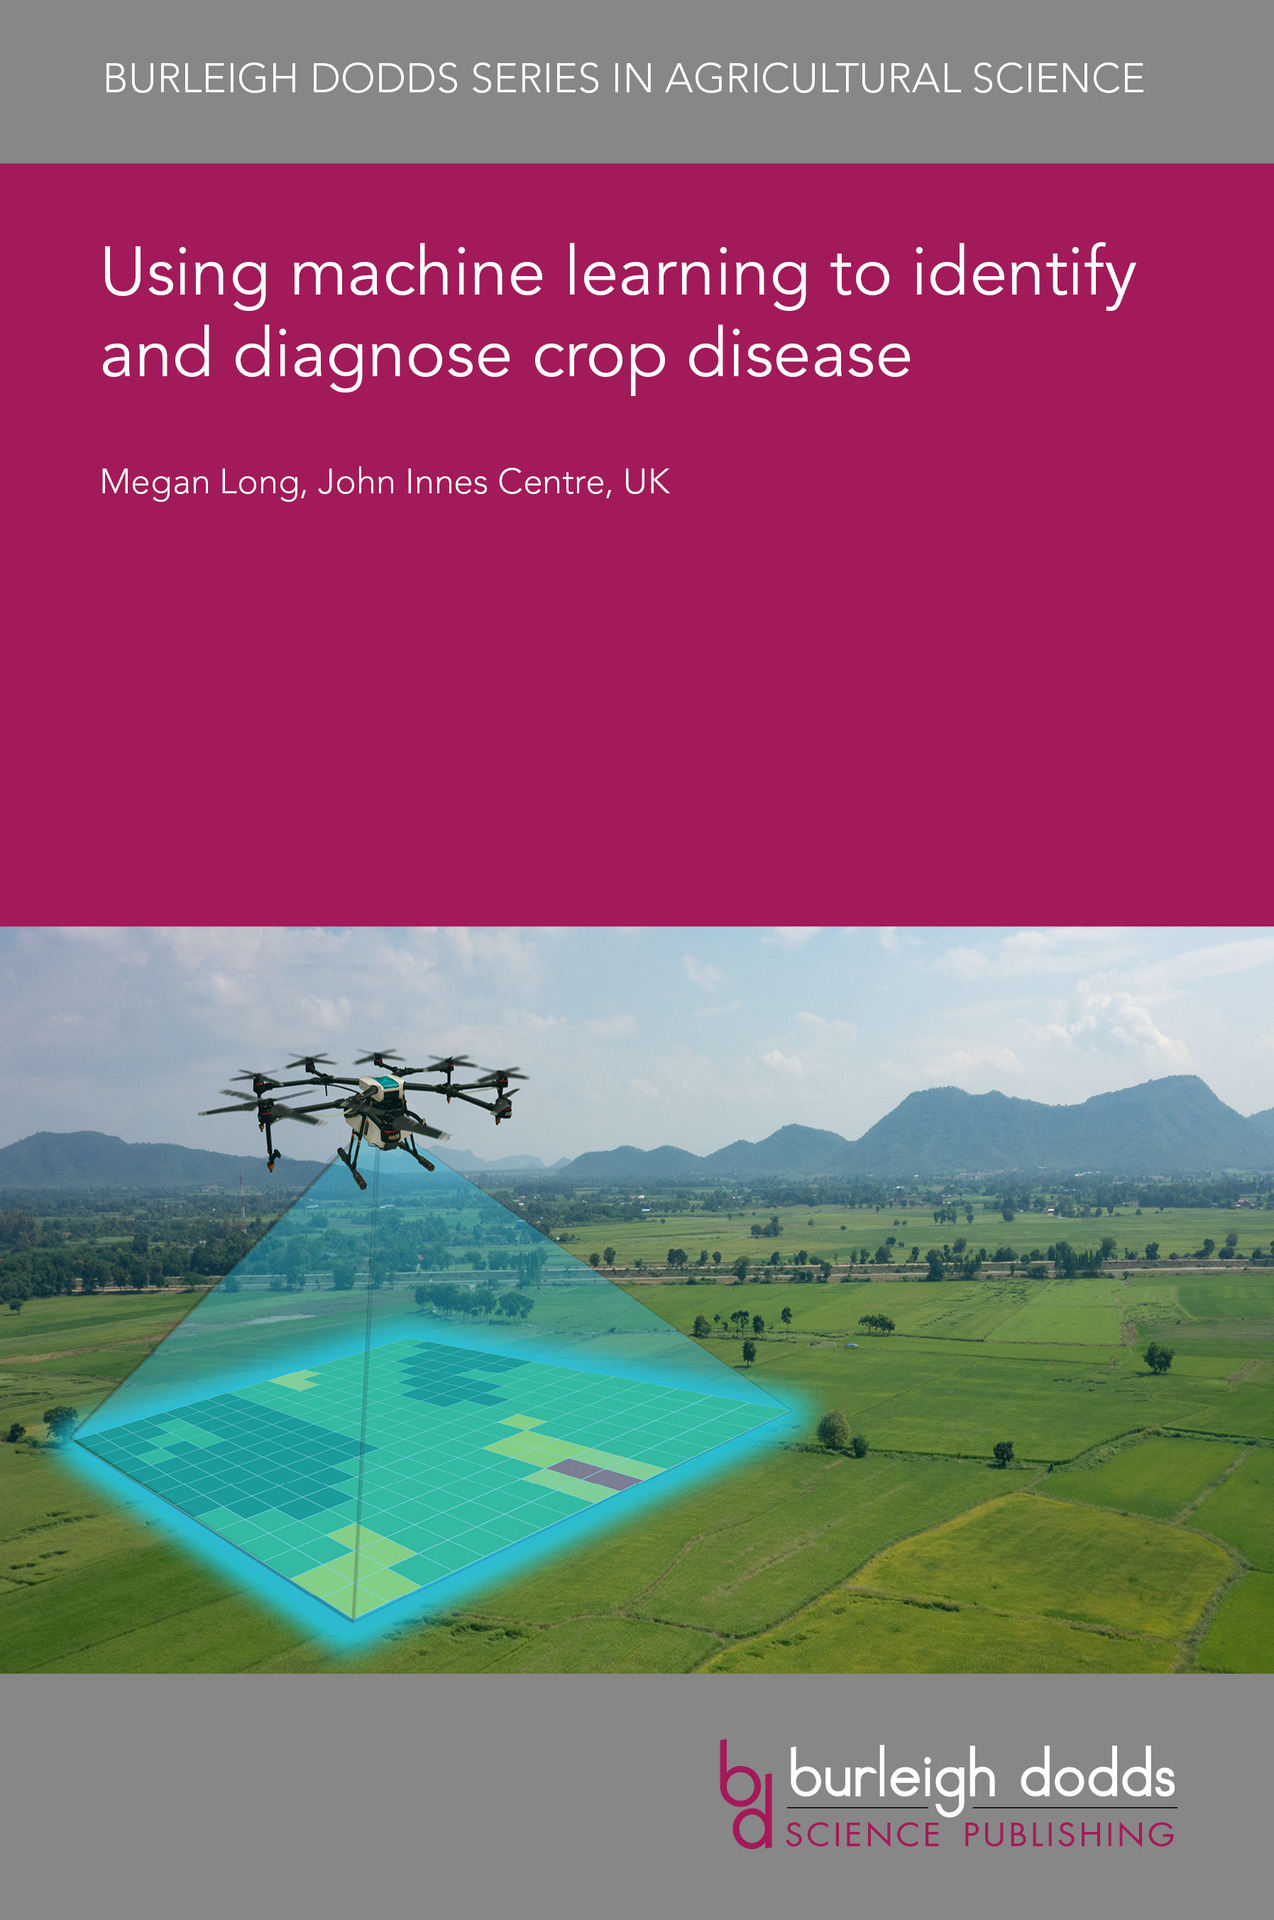 Using machine learning to identify and diagnose crop disease